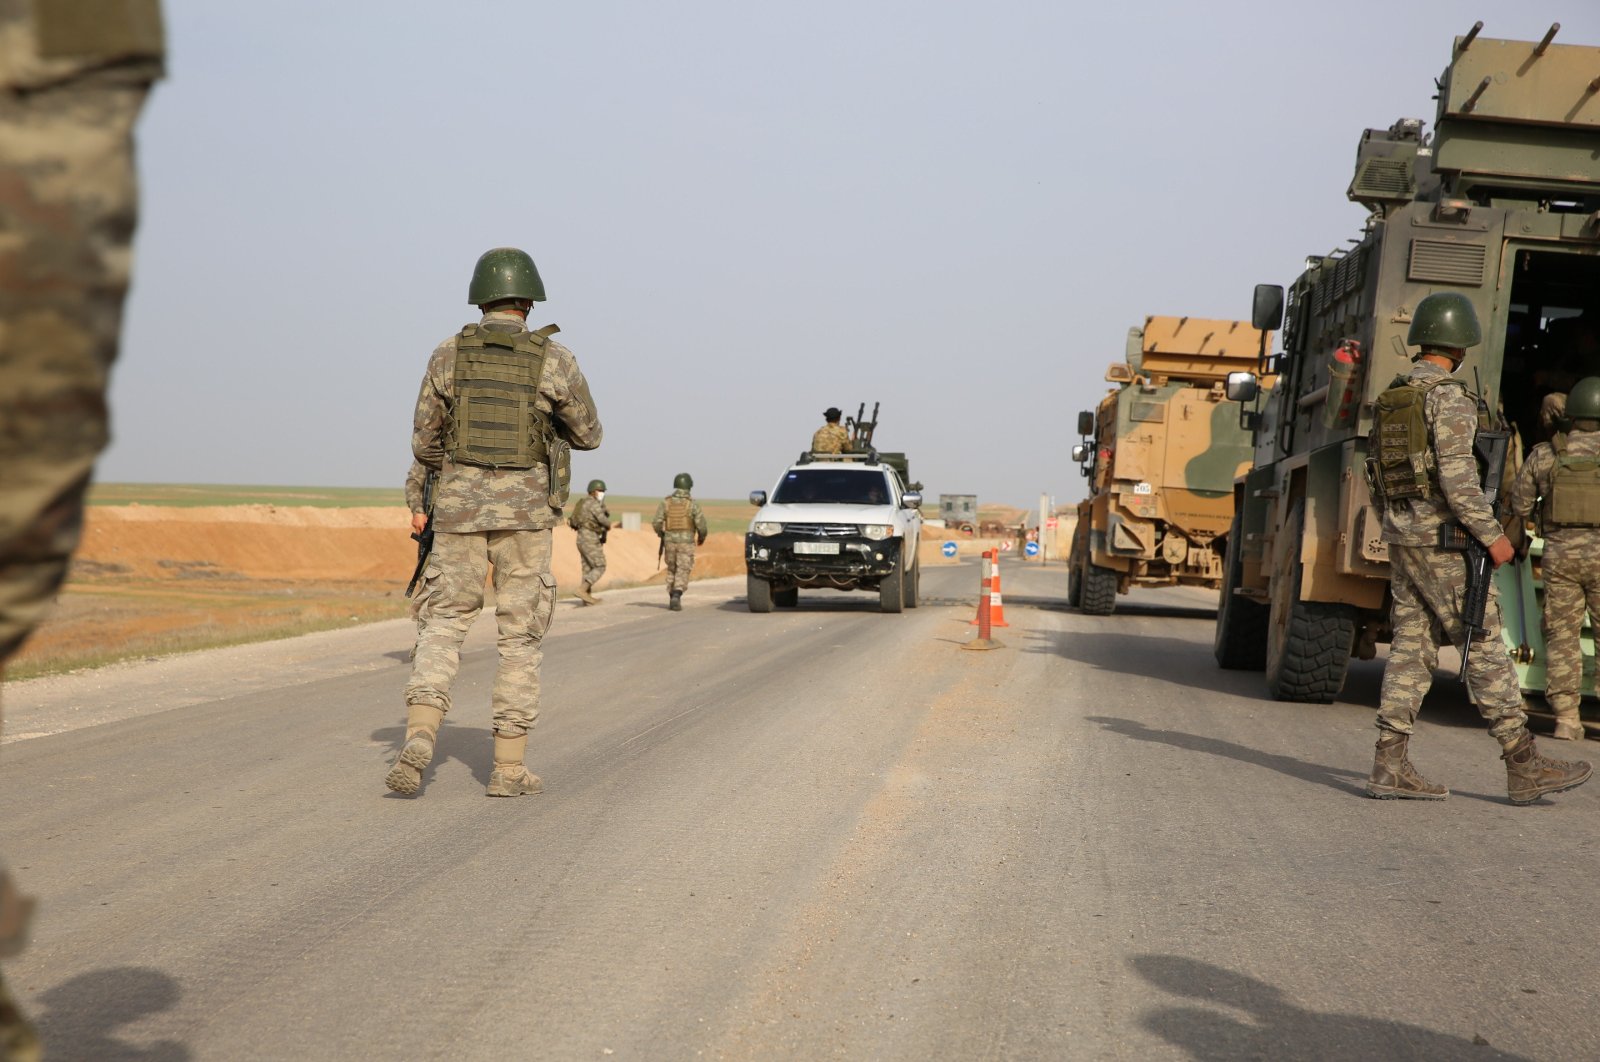 Turkish soldiers conduct road checks in Ras al-Ain, Syria, April 8, 2021. (Sabah File Photo)